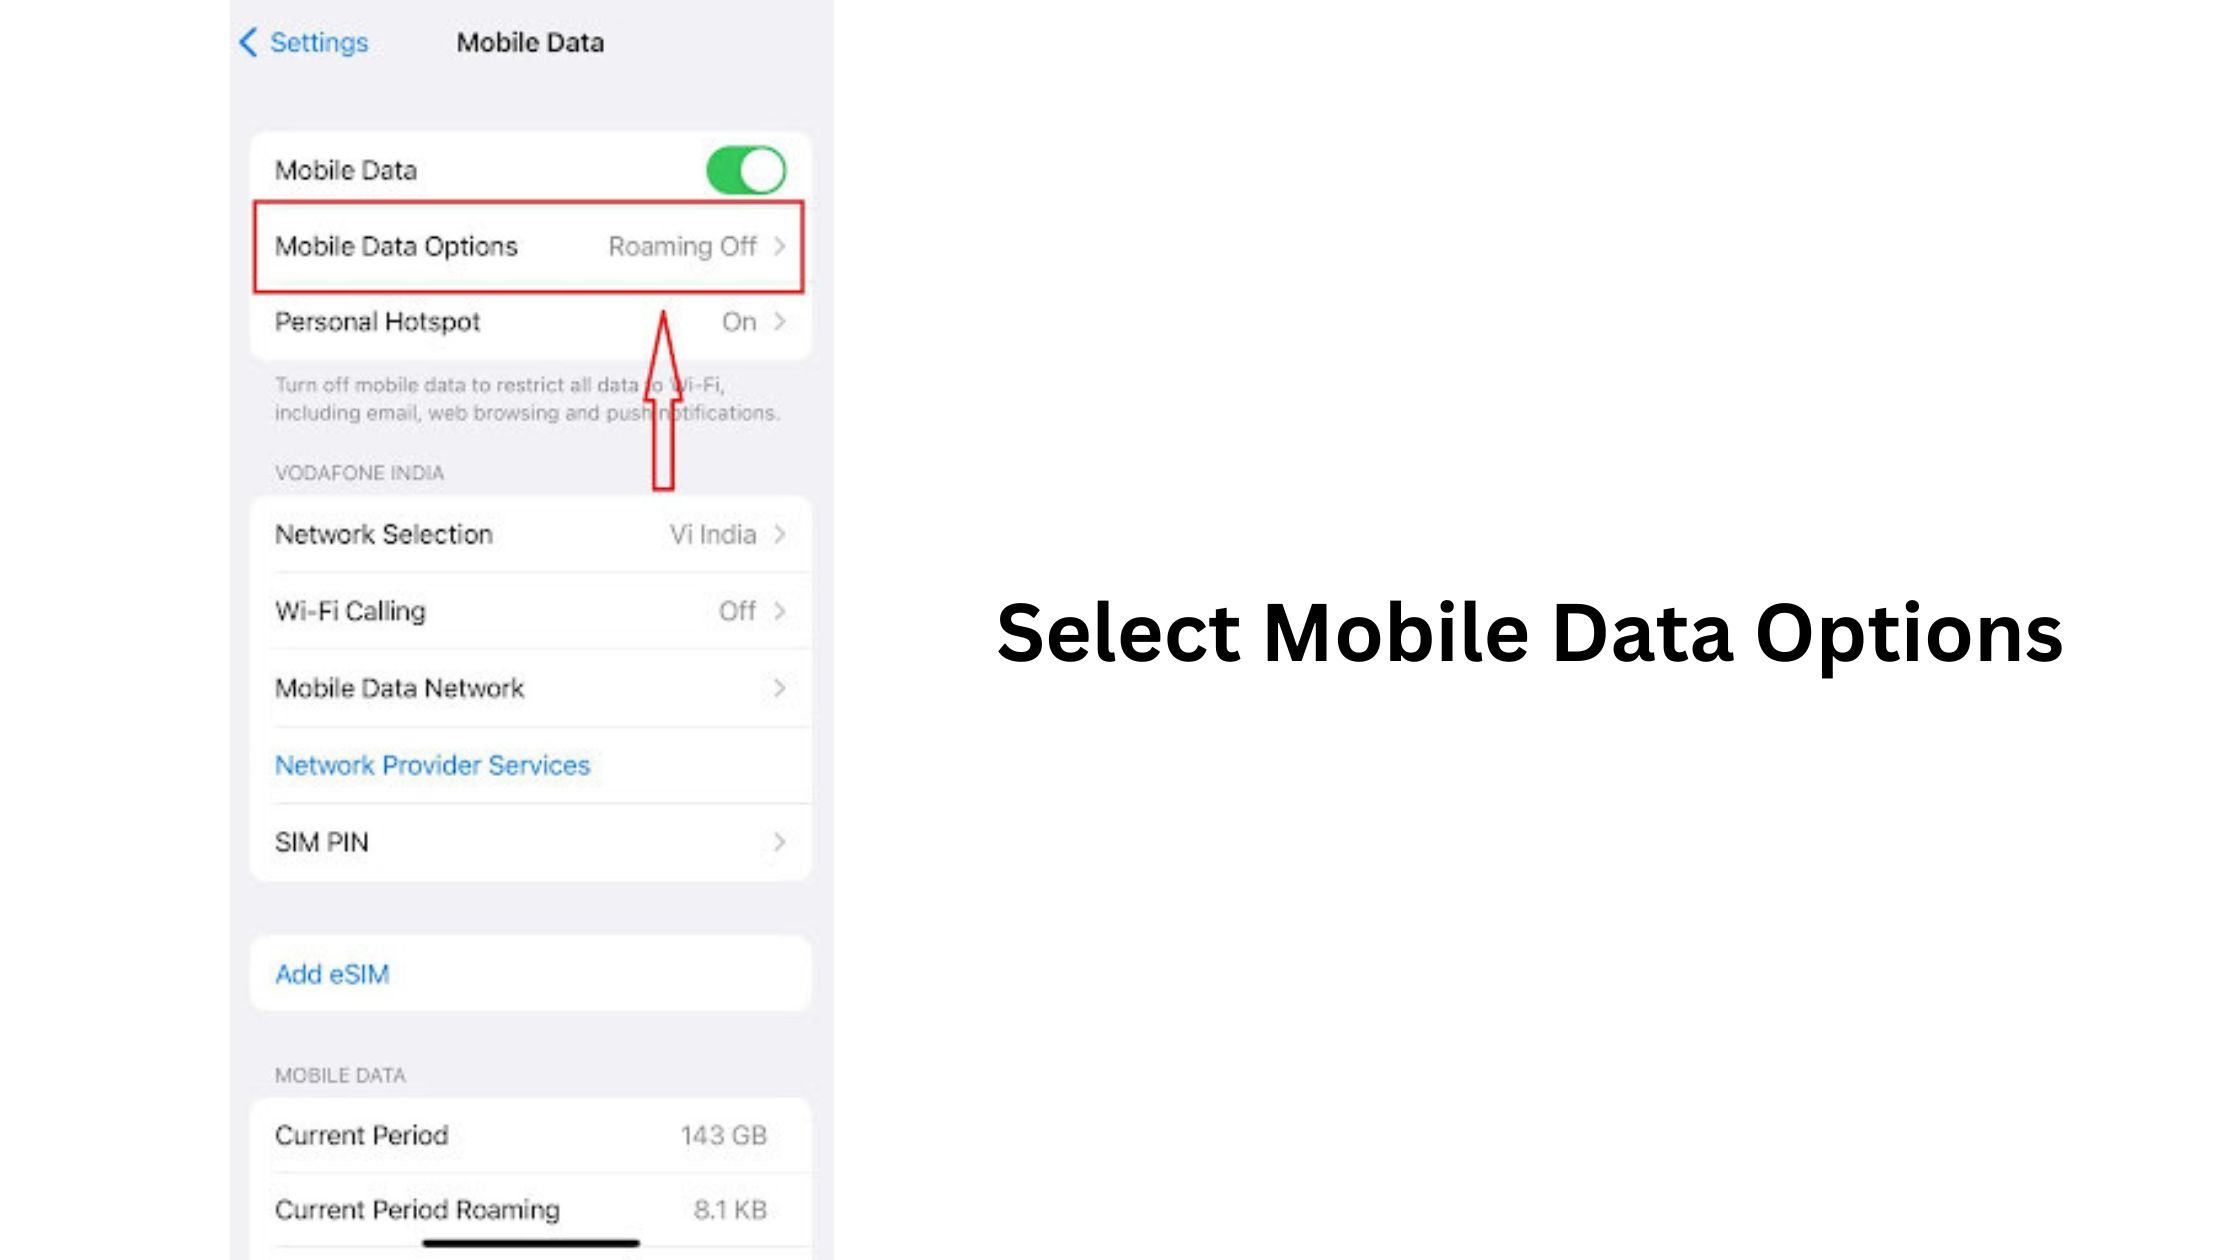 click on Mobile Data Options